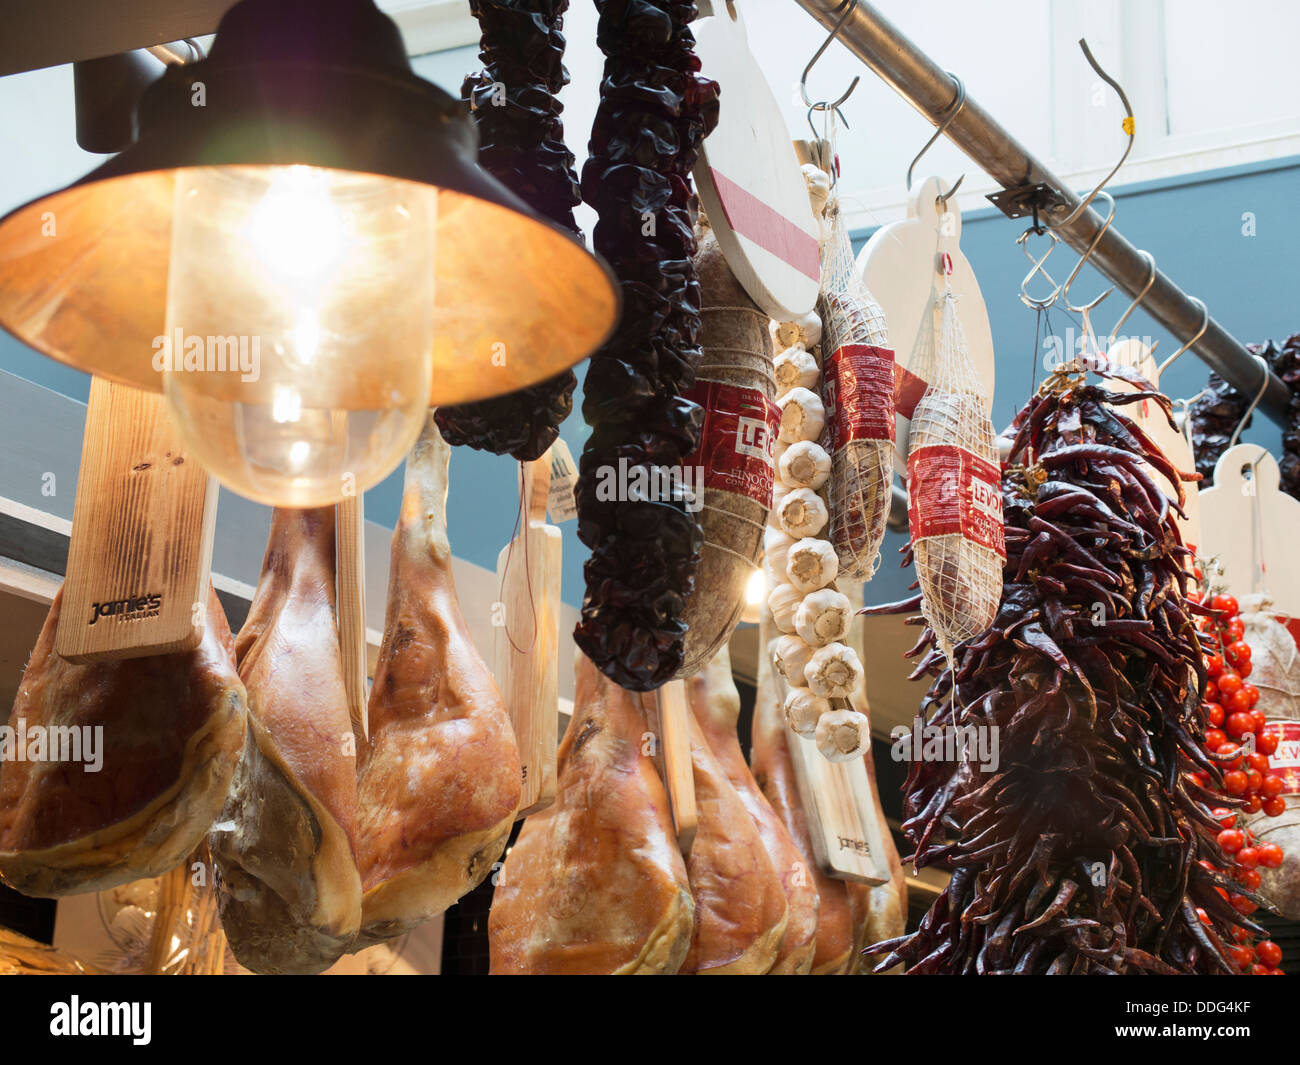 Suspended hams in an Italian Restaurant in Oxford, England 4 Stock Photo